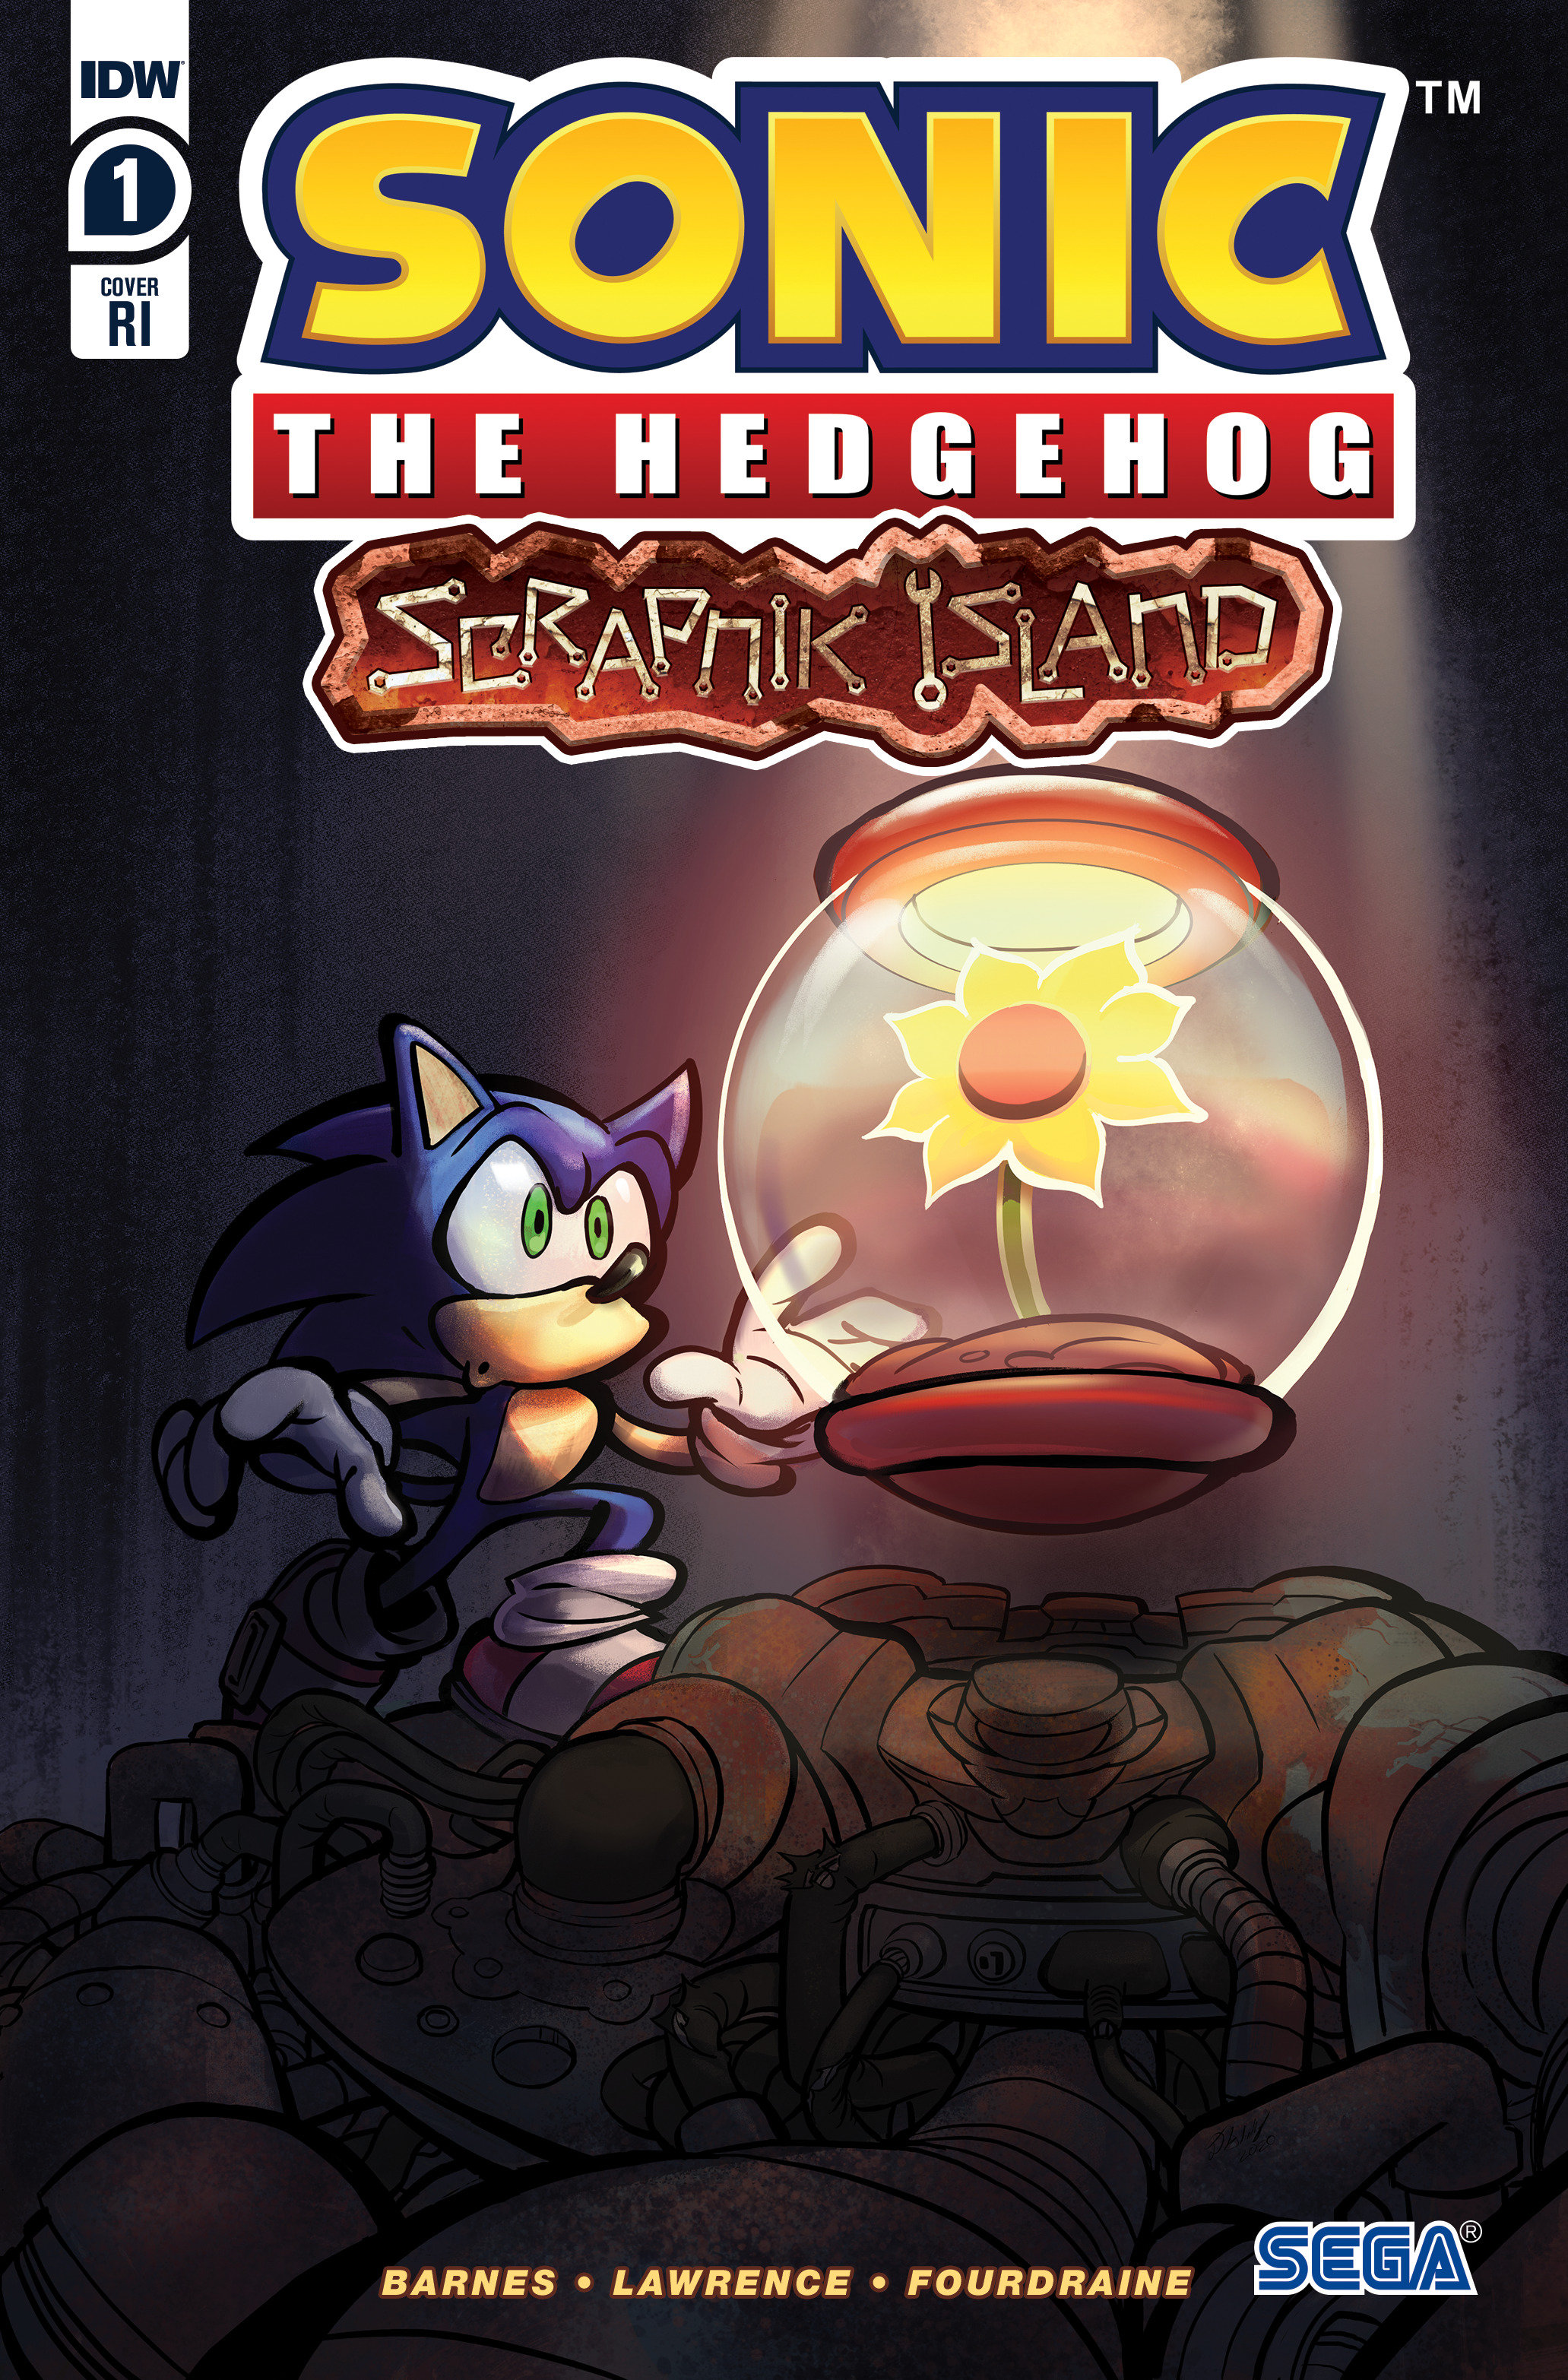 Sonic the Hedgehog Scrapnik Island #1 Cover C 1 for 10 Incentive Skelley